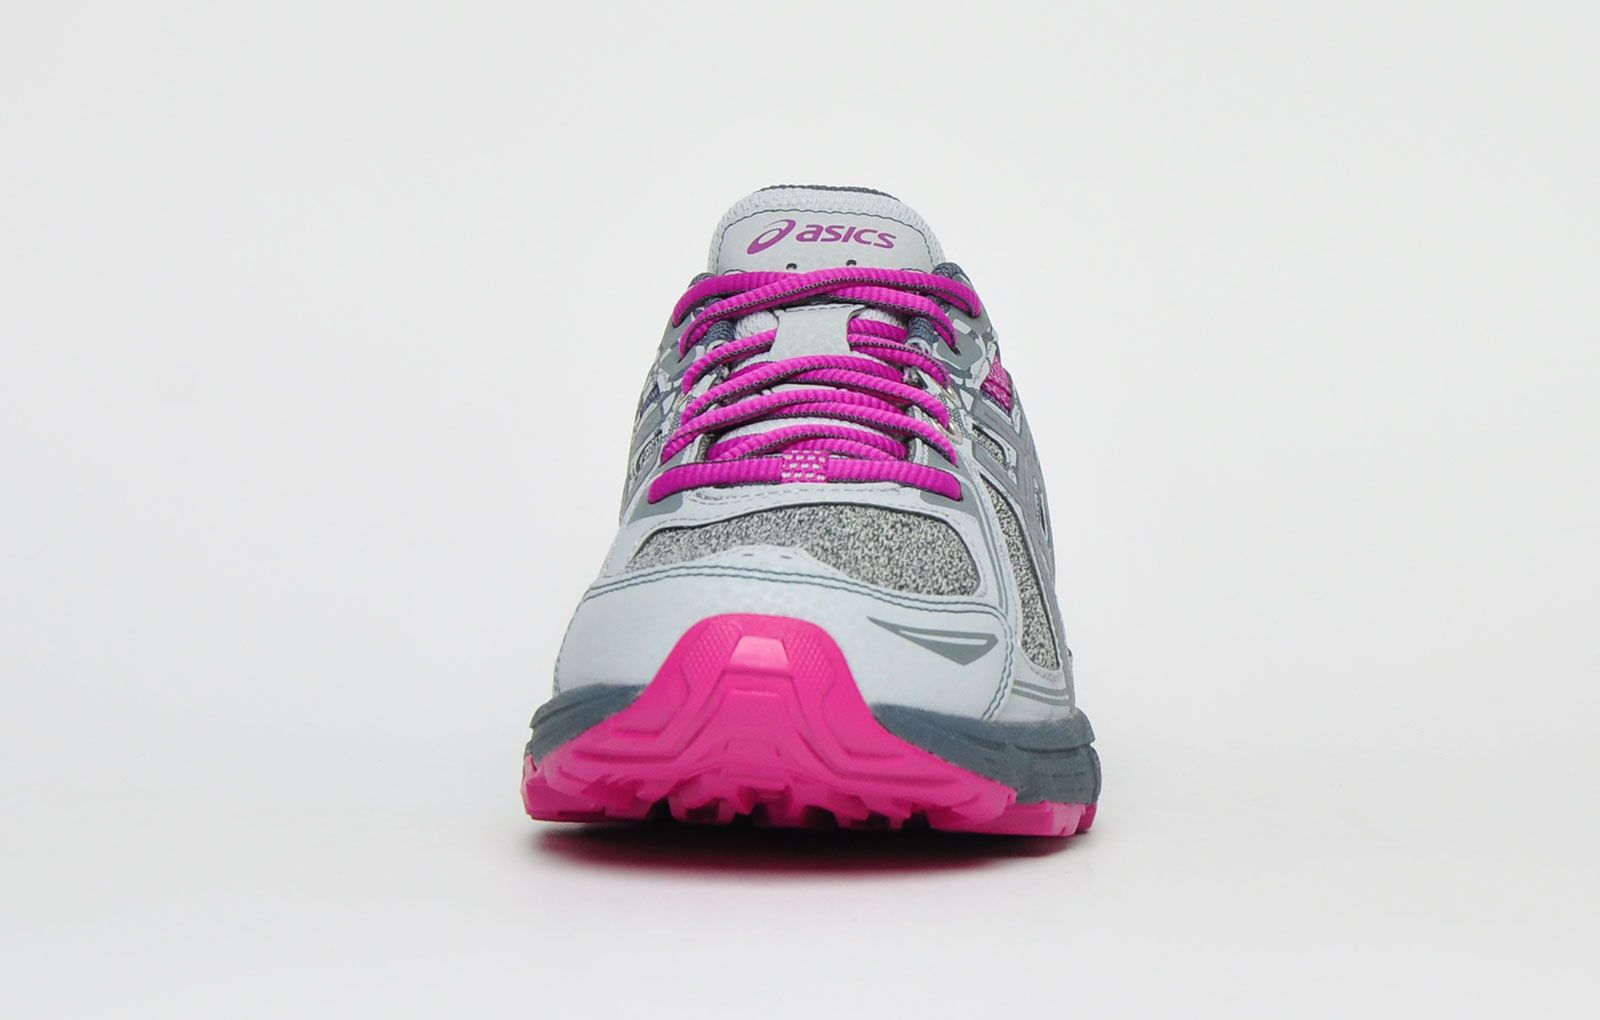 These Asics Gel Venture 6 womens all terrain running shoes will provide excellent support and traction no matter what comes your way. Featuring a practical lugged outsole that offers grip on uphill and downhill conditions. Whether you’re a beginner or professional, these all terrain running shoes are perfect for you! <p>Engineered from a fusion of textile mesh and synthetic materials, these Asics Gel Venture 6 womens all terrain running shoes features a lightweight design with maximum performance capabilities, the Asics Venture 6 is a must have on and off-road shoe that will deliver every time. </p> <p>- Textile mesh upper construction enhances ventilation </p> <p>- Durable synthetic overlays deliver additional support </p> <p>- Stitched Toe Bumper delivers extra protection against trail hazards </p> <p>- Removable Sockliner delivers a comfy fit </p> <p>- Rearfoot Gel cushioning system delivers shock resistance in every stride </p> <p>- Trustic system reduces weight whilst upkeeping the support </p> <p>- Asics Branding throughout</p>